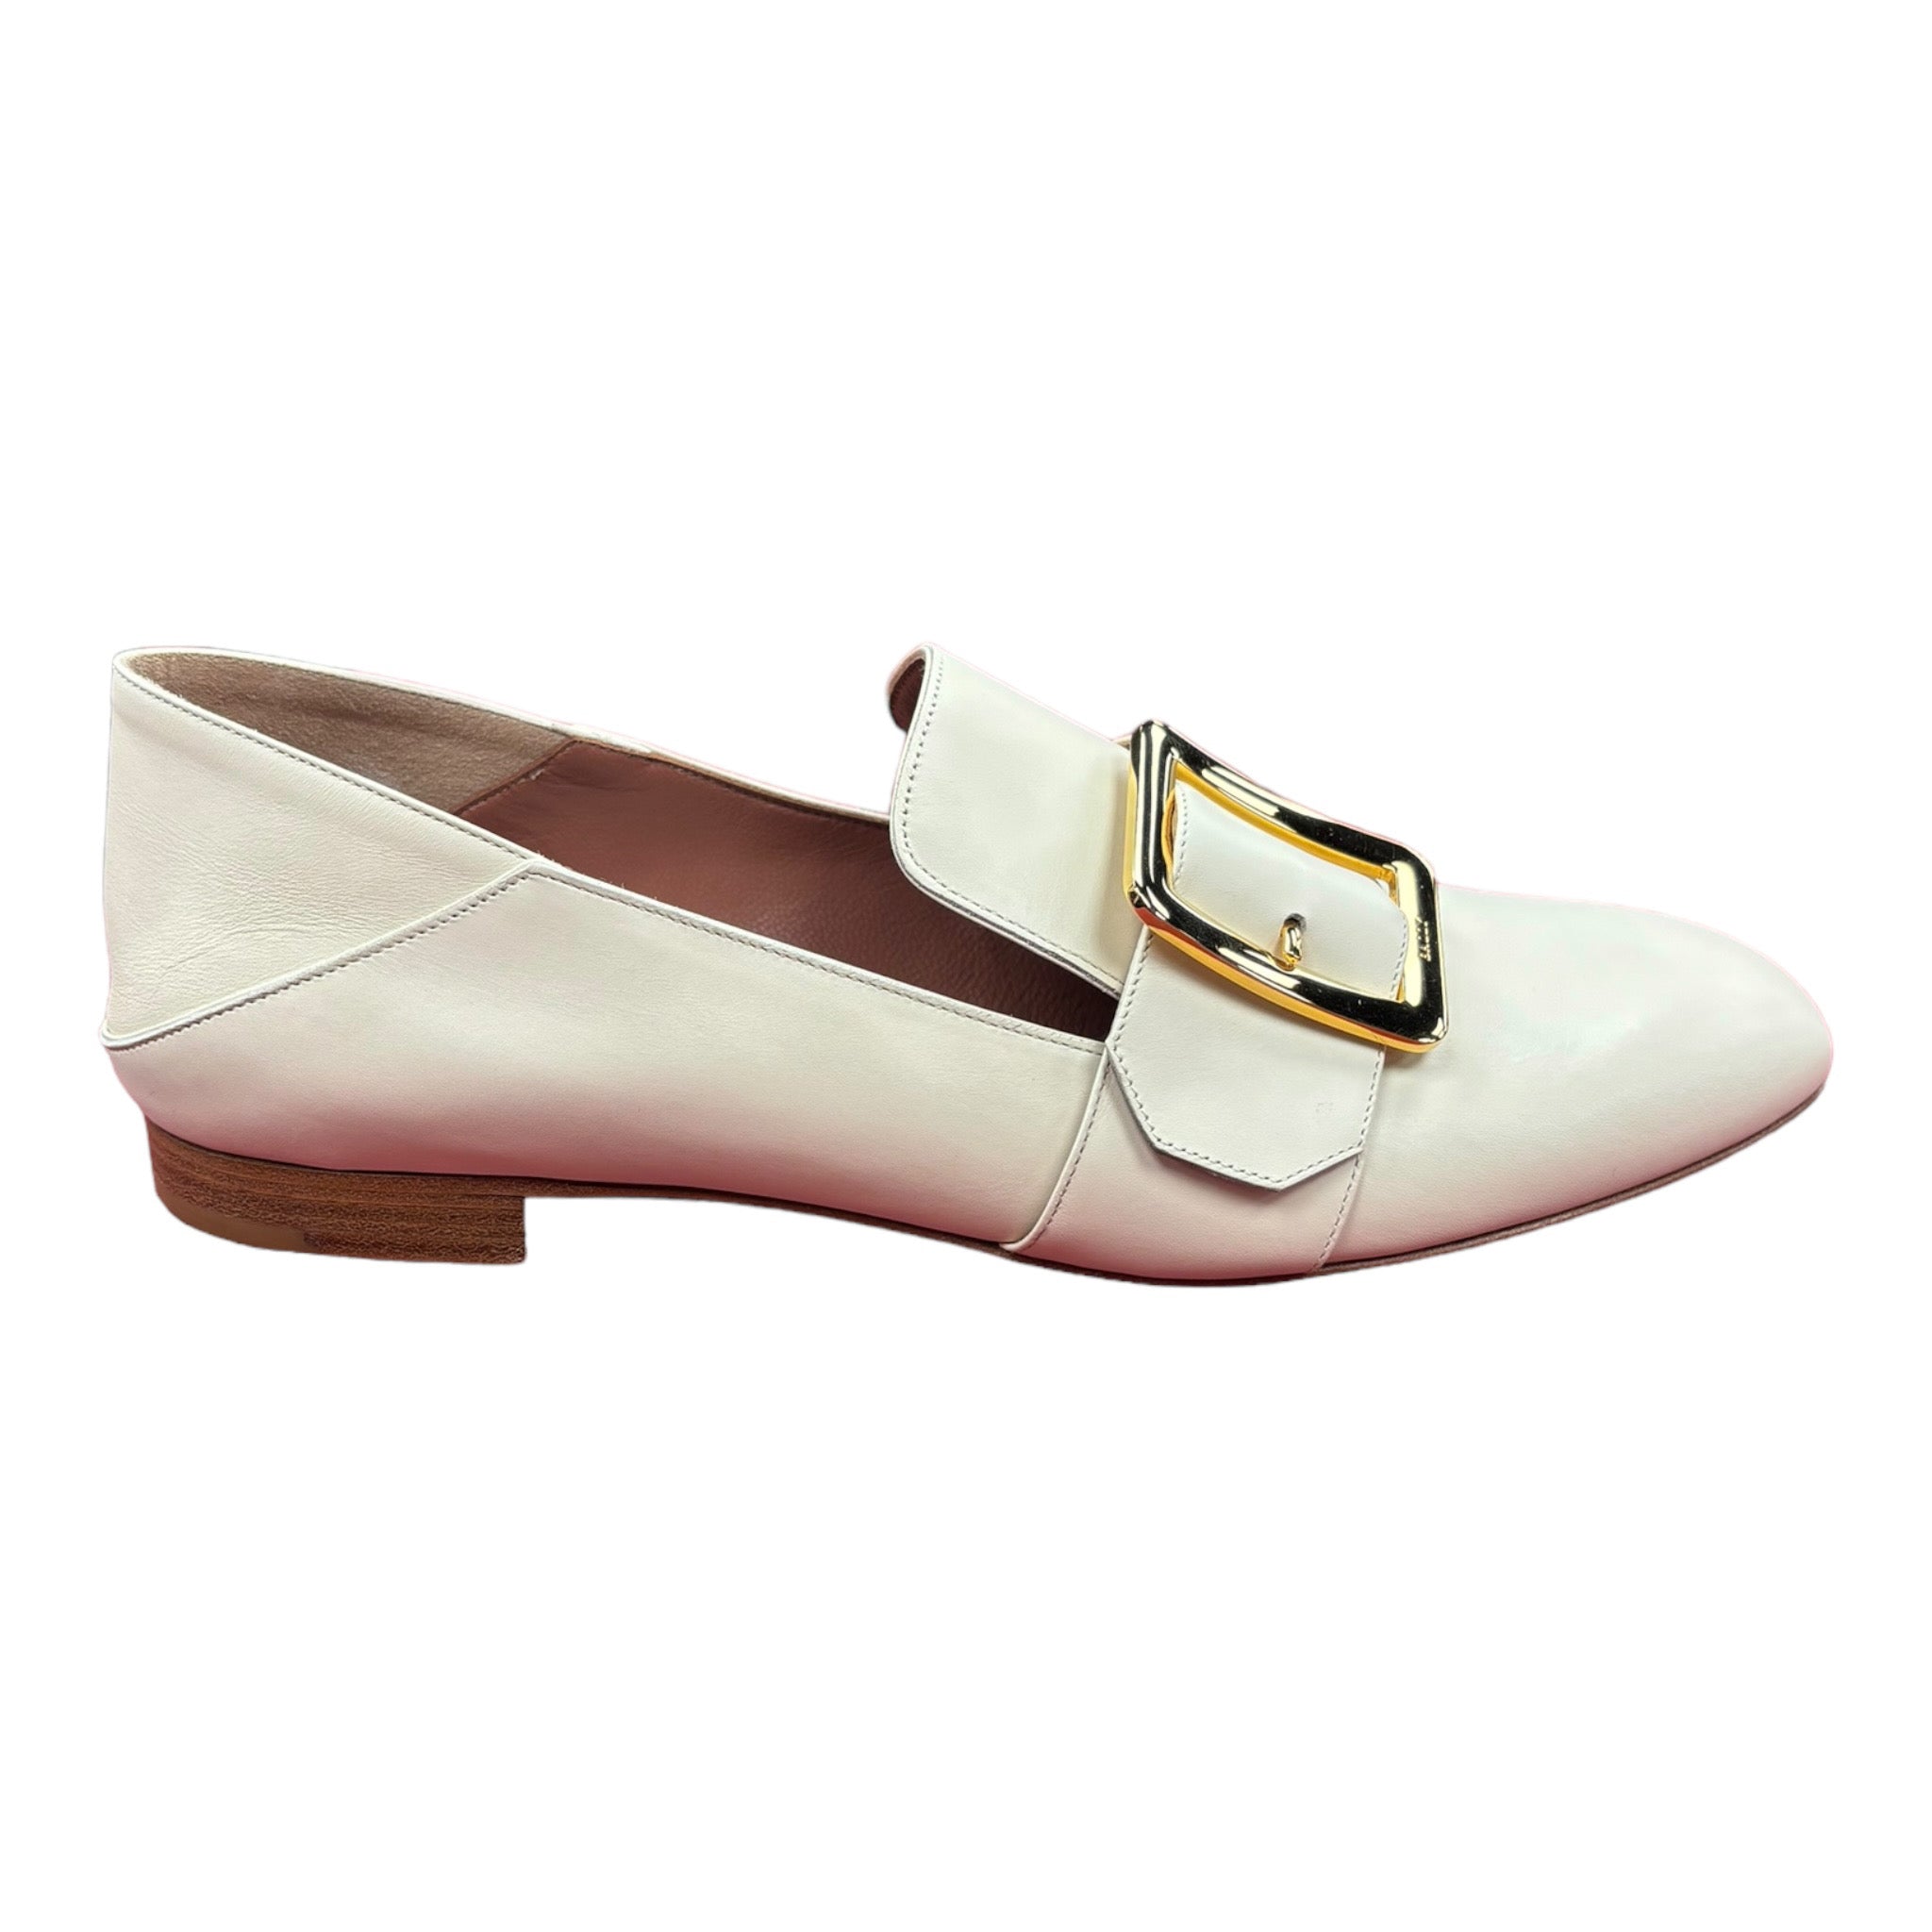 BALLY JANELLE BONE LEATHER WOMENS SHOES